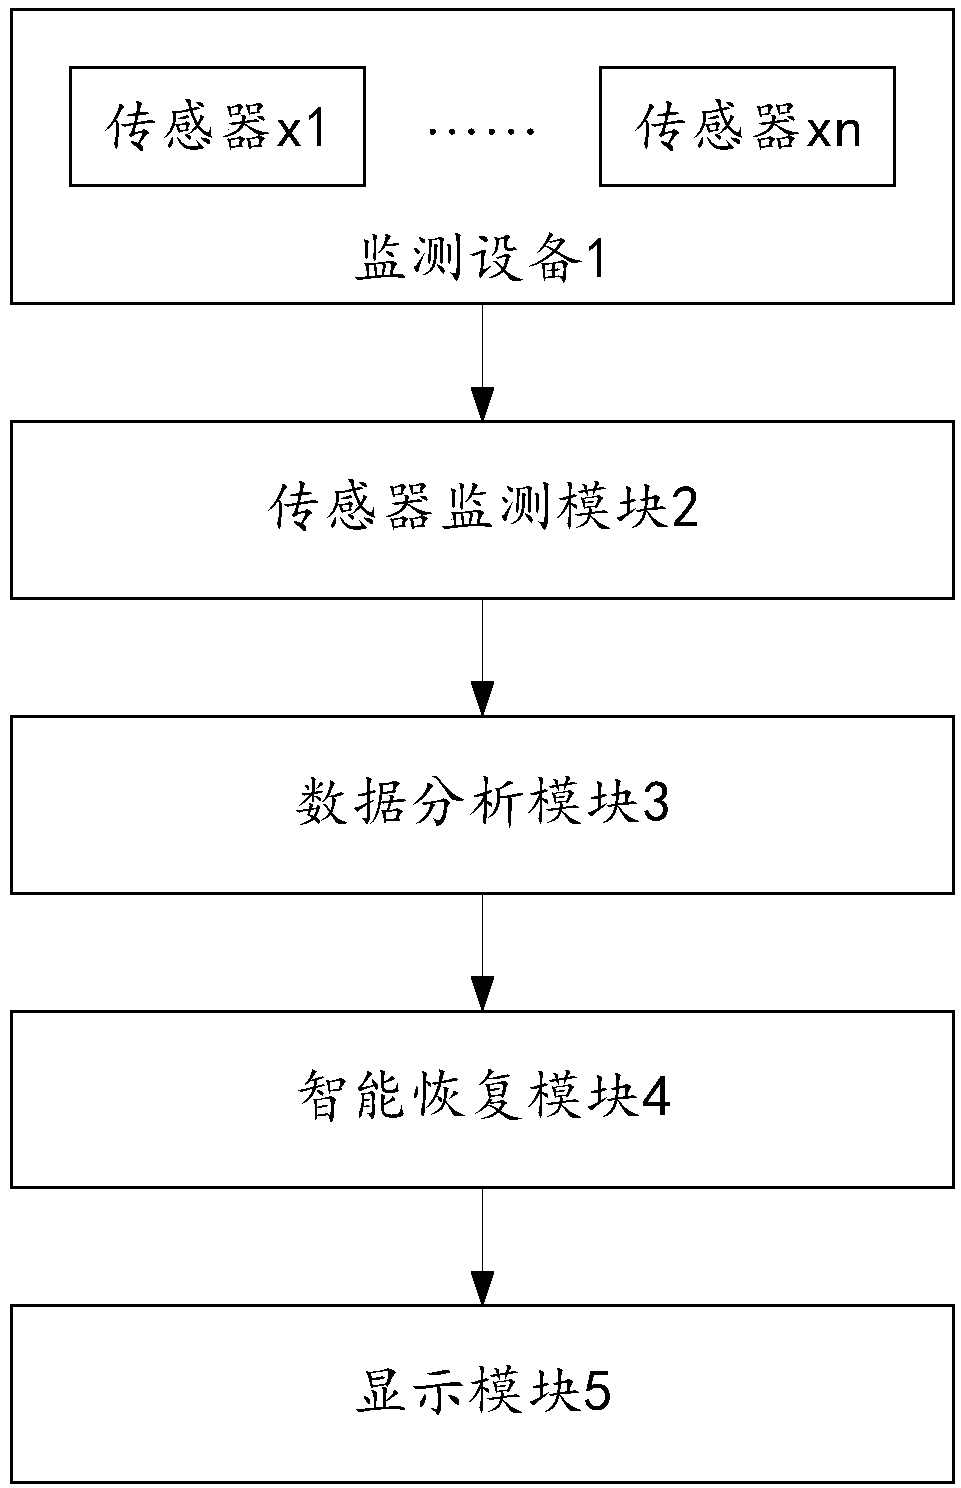 Intelligent automatic repairing method and apparatus for multi-parameter environmental monitoring device